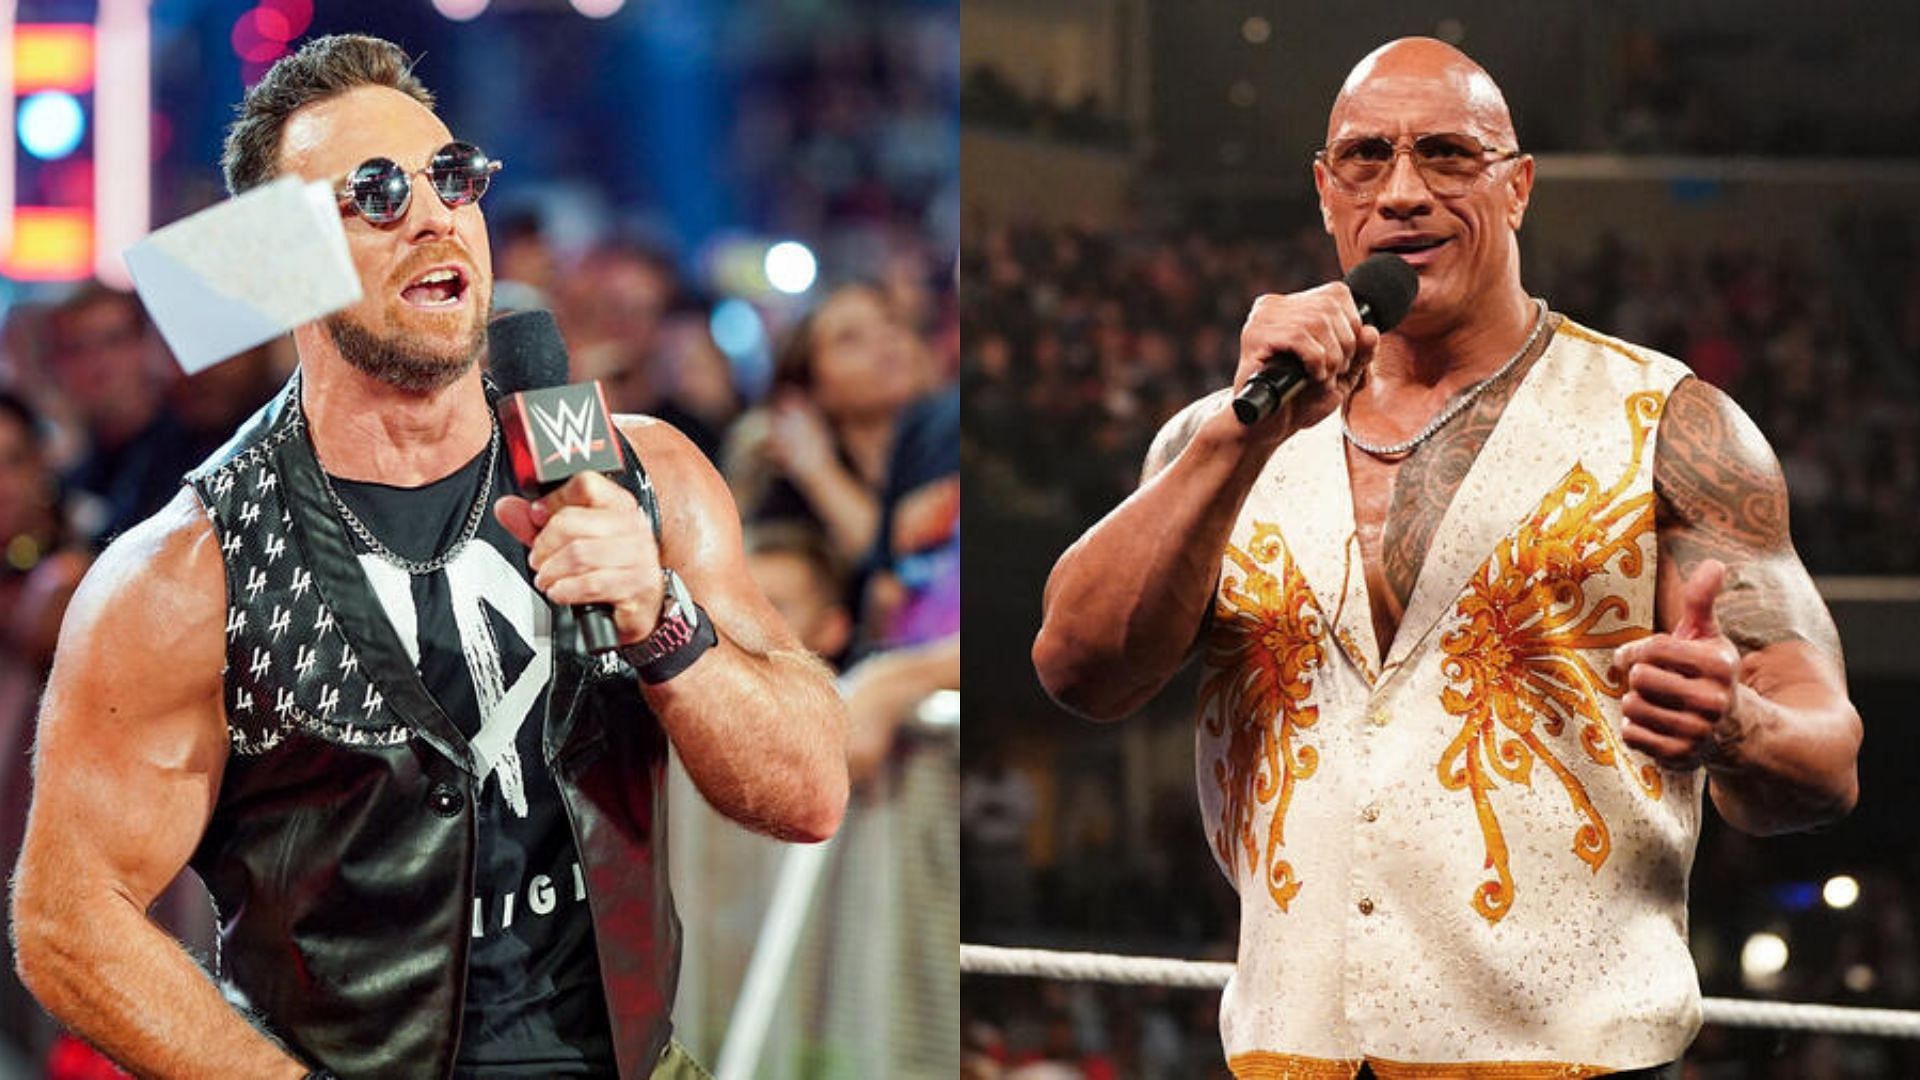 LA Knight and The Rock will both be on the WrestleMania 40 card